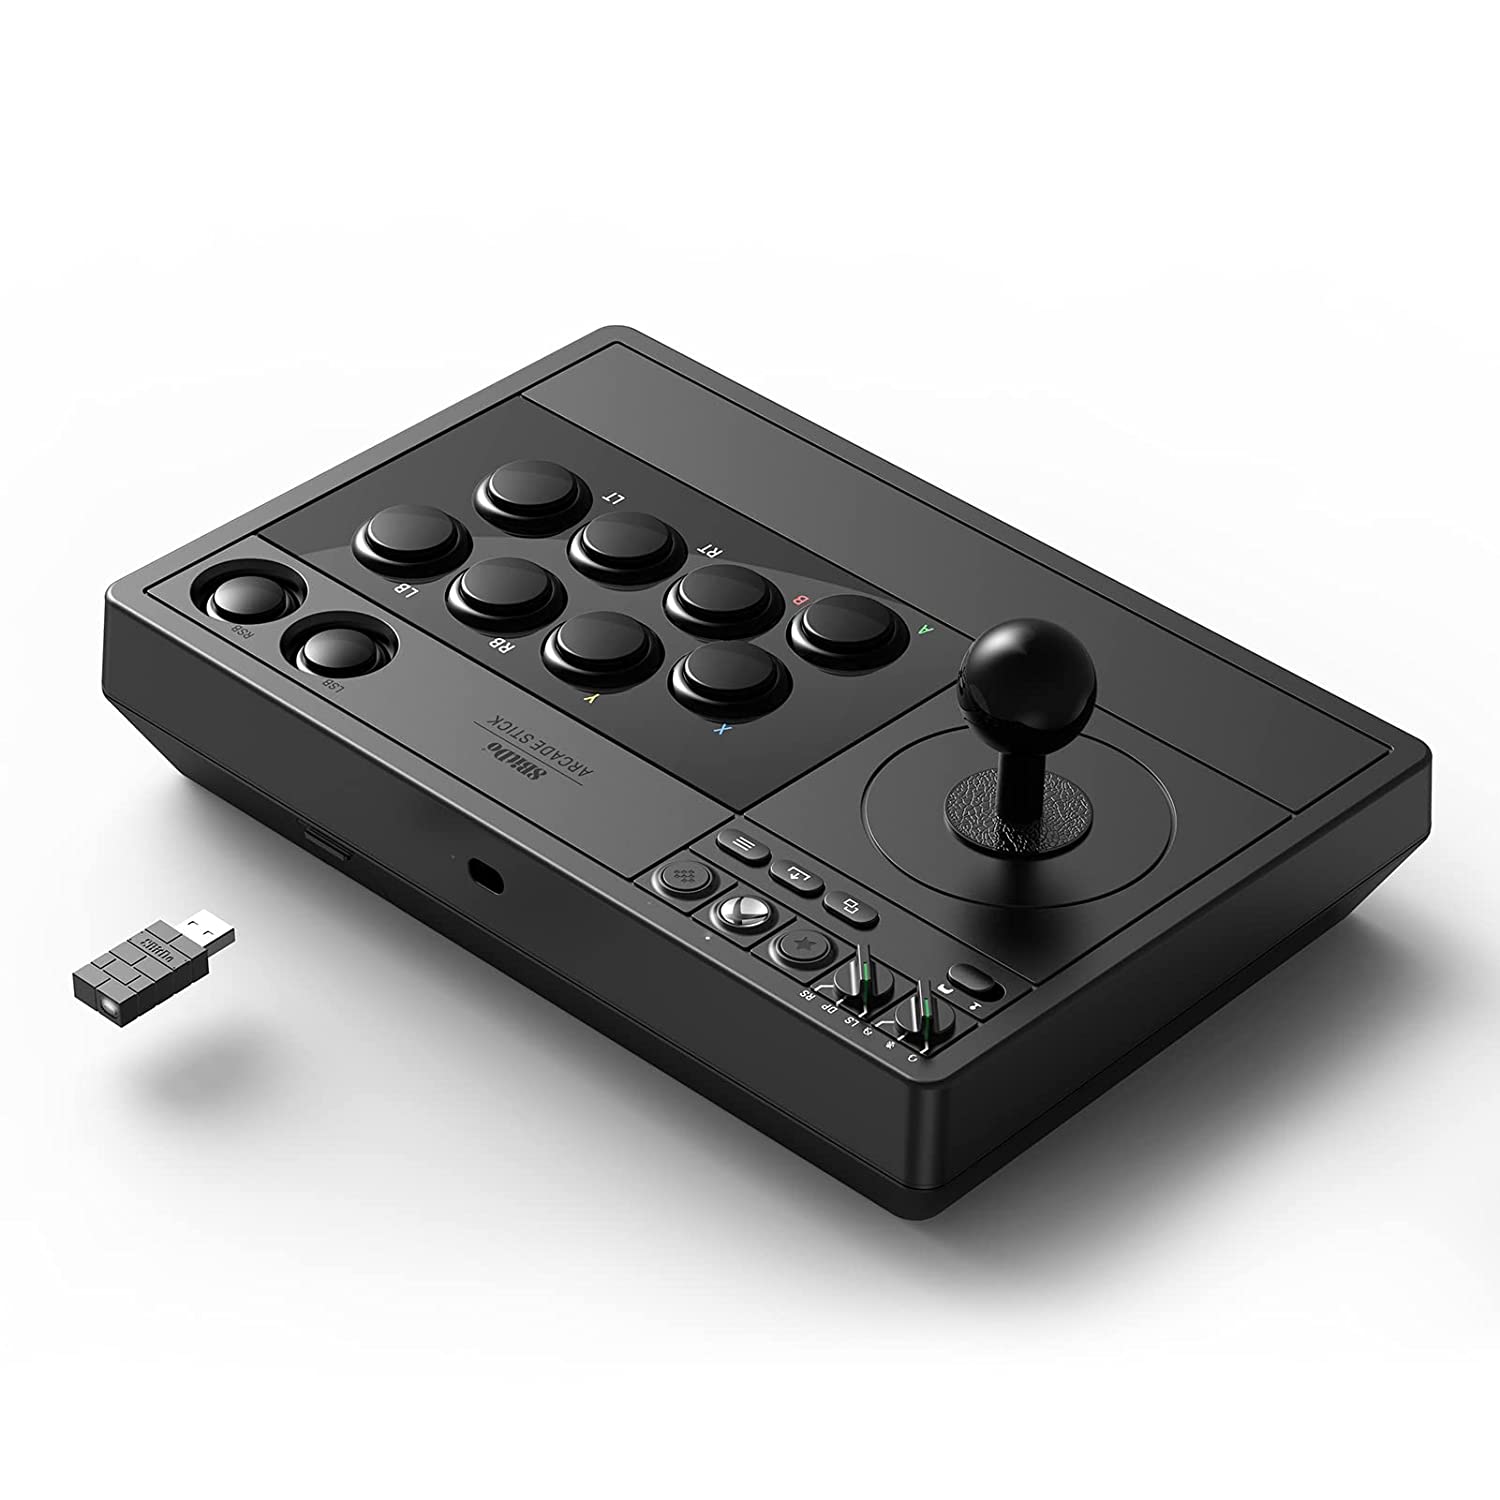 8BitDo First Official Wireless, Customizable Arcade Stick for Xbox to Be Released Soon